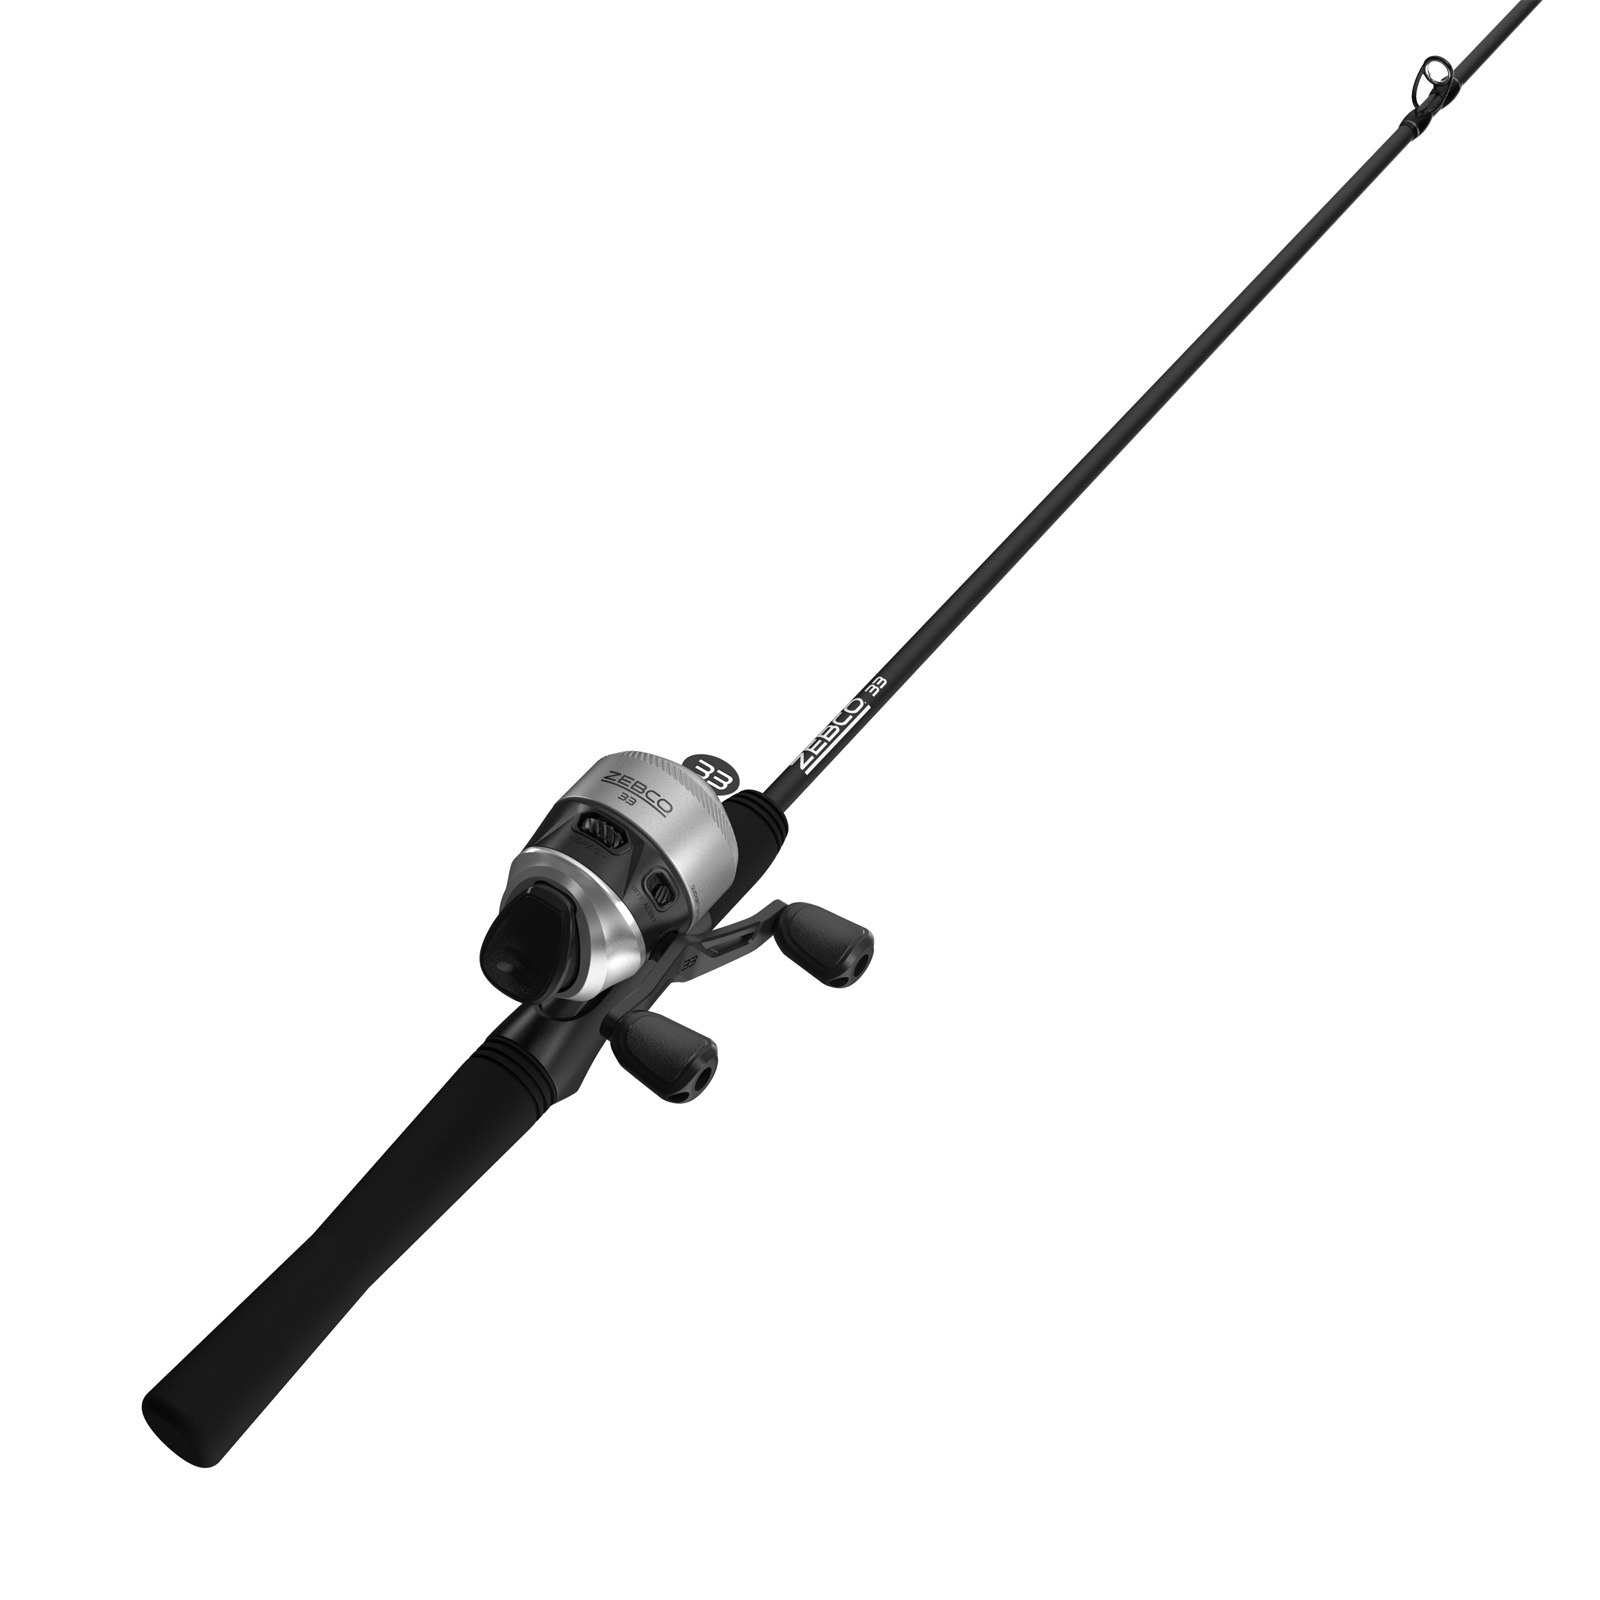 Zebco 33 Ladies Spincast Fishing Reel and Rod Combo Multi-Color 33L602M10CNS4 30 